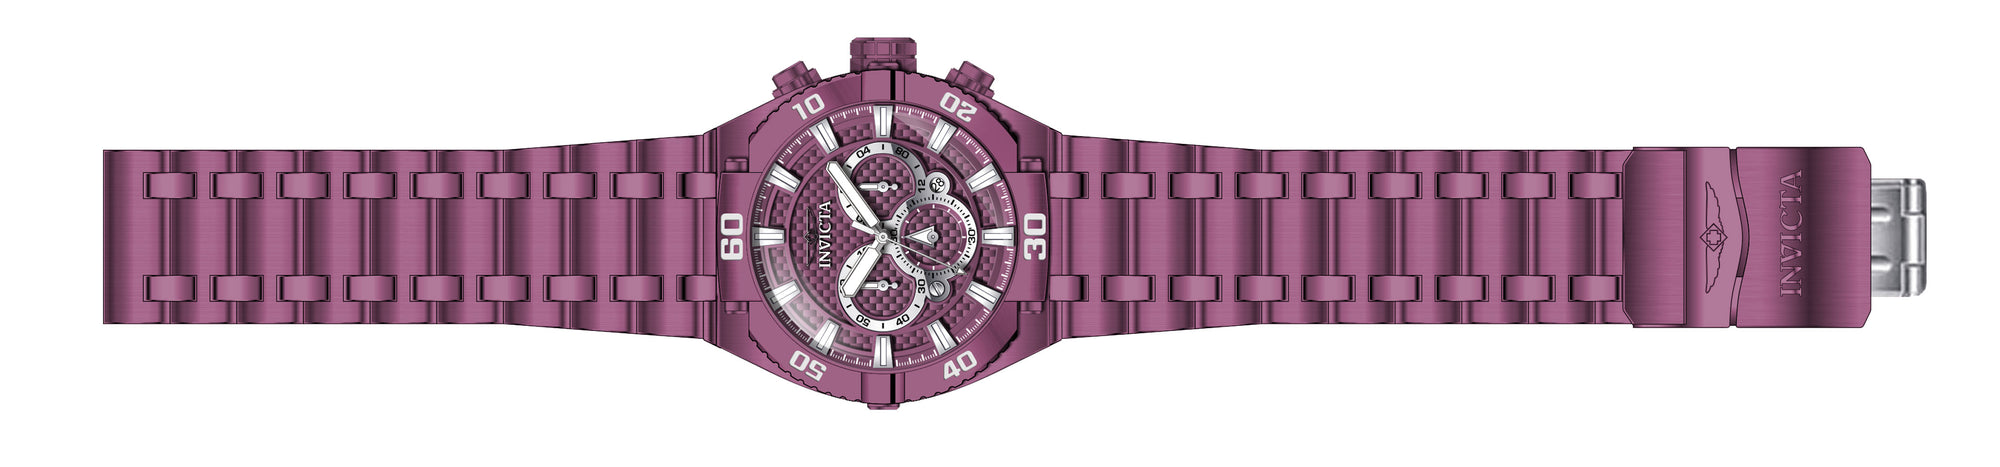 Band for Invicta Coalition Forces Men 40917